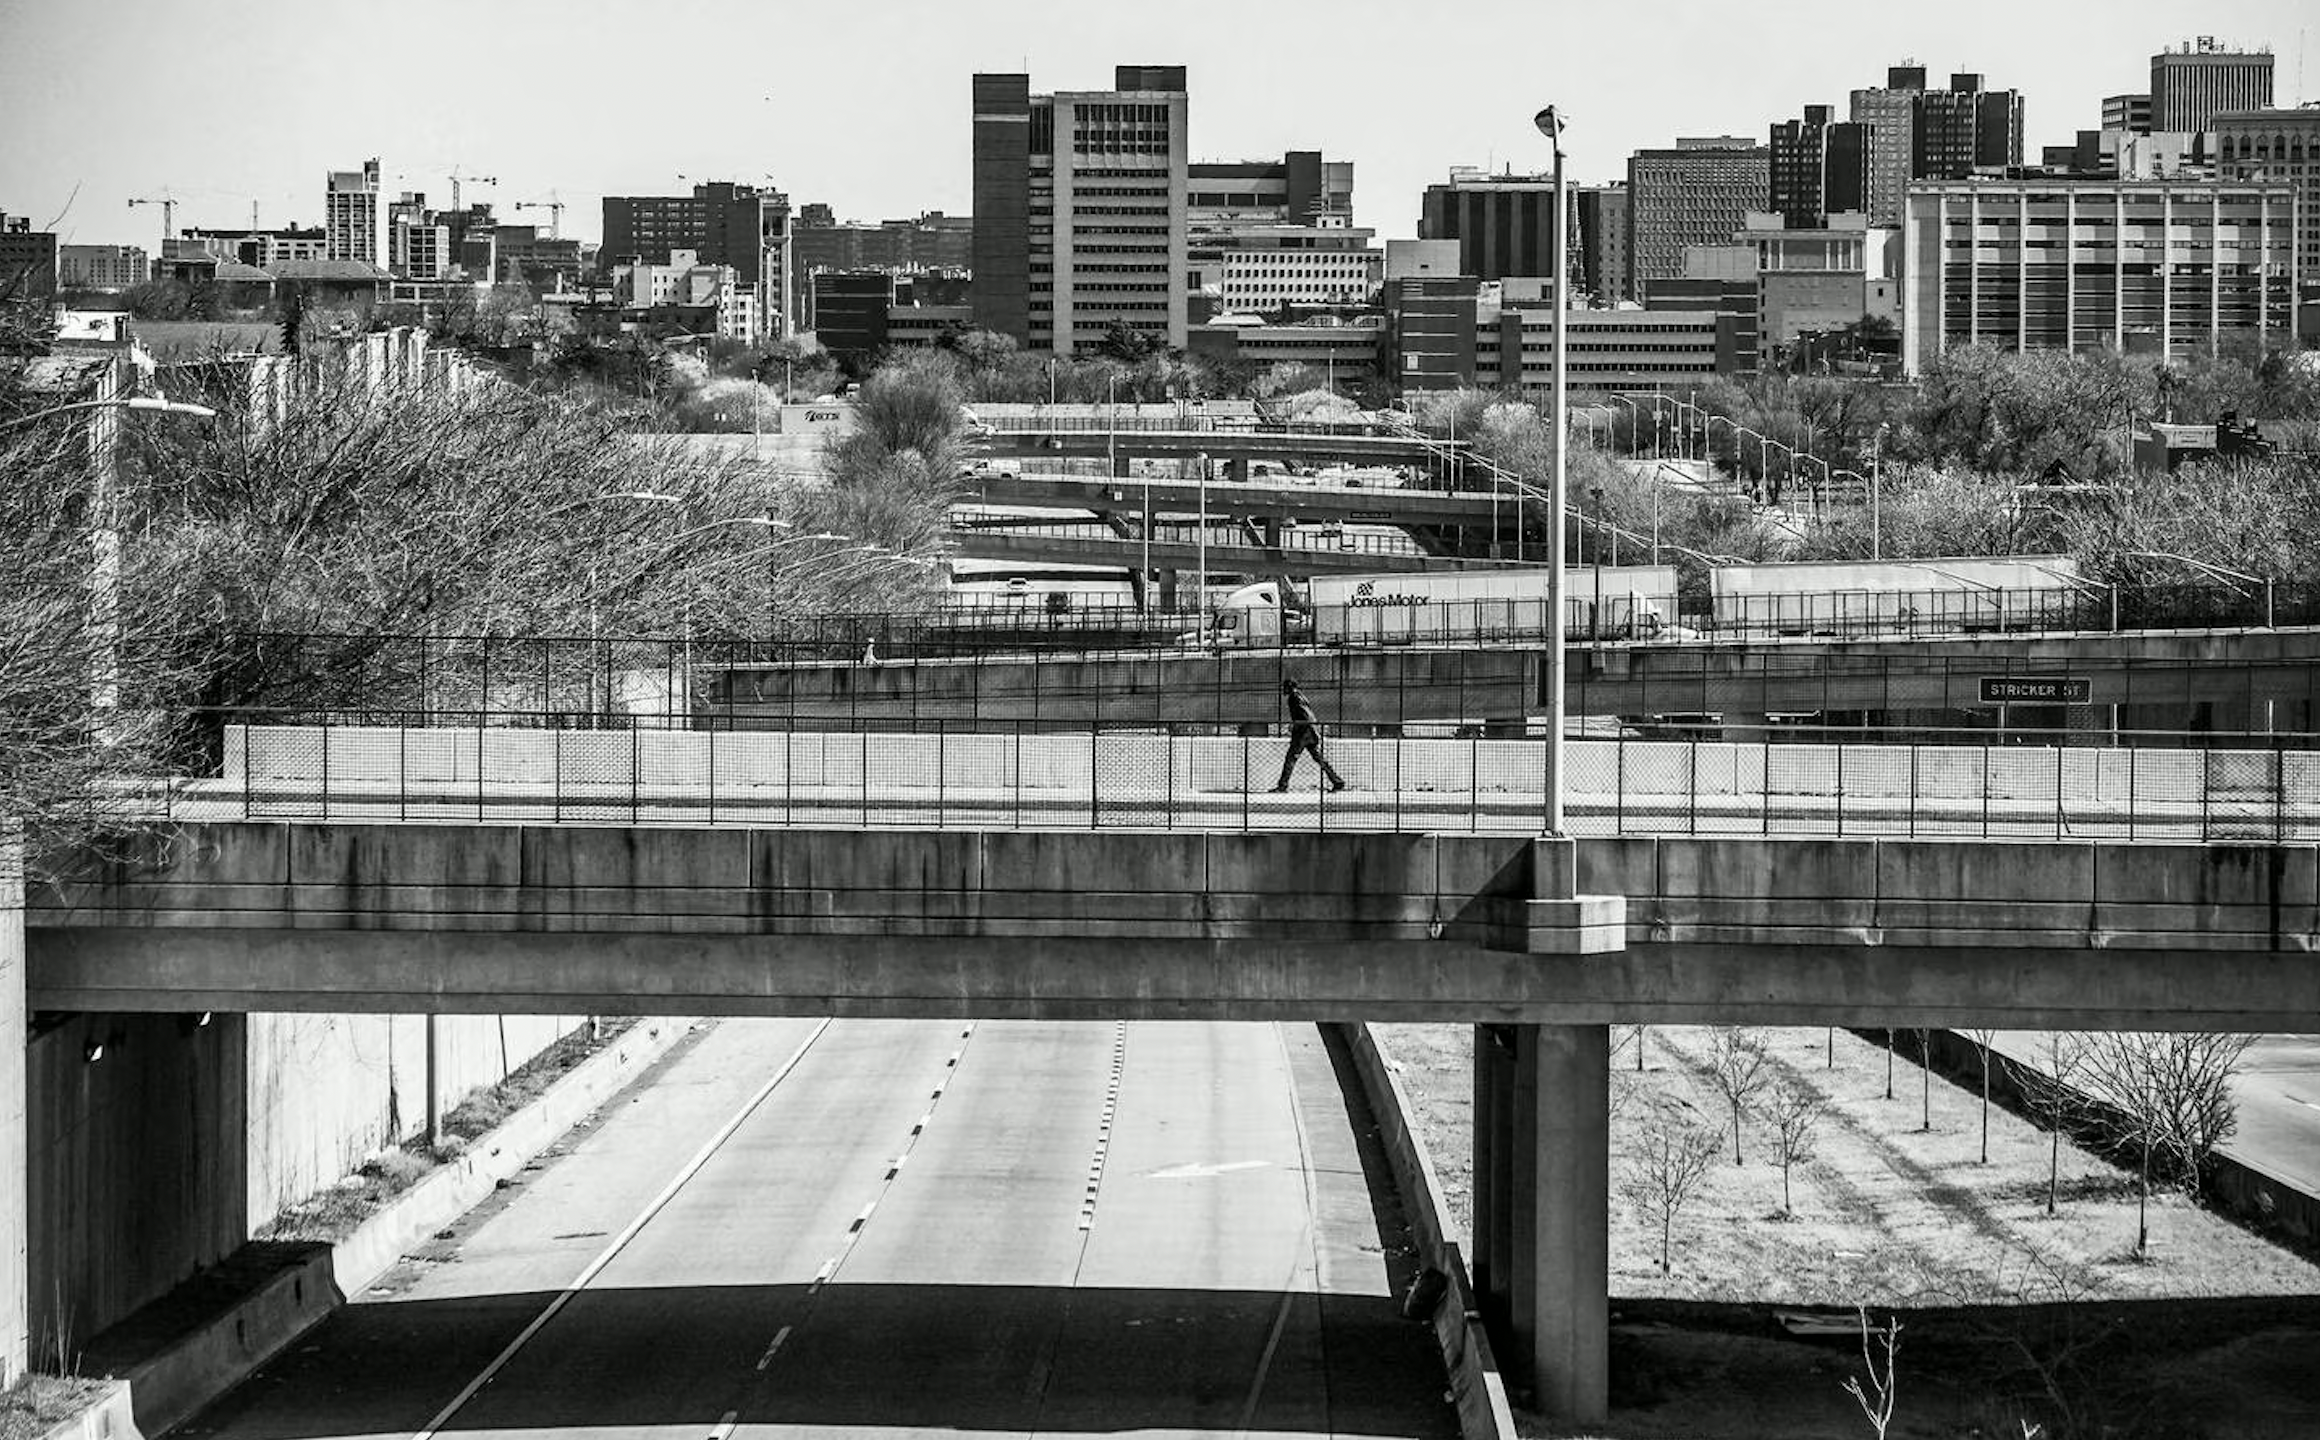 A pedestrian pass over a bridge above U.S. Route 40 in Baltimore on Wednesday, March 8, 2023.